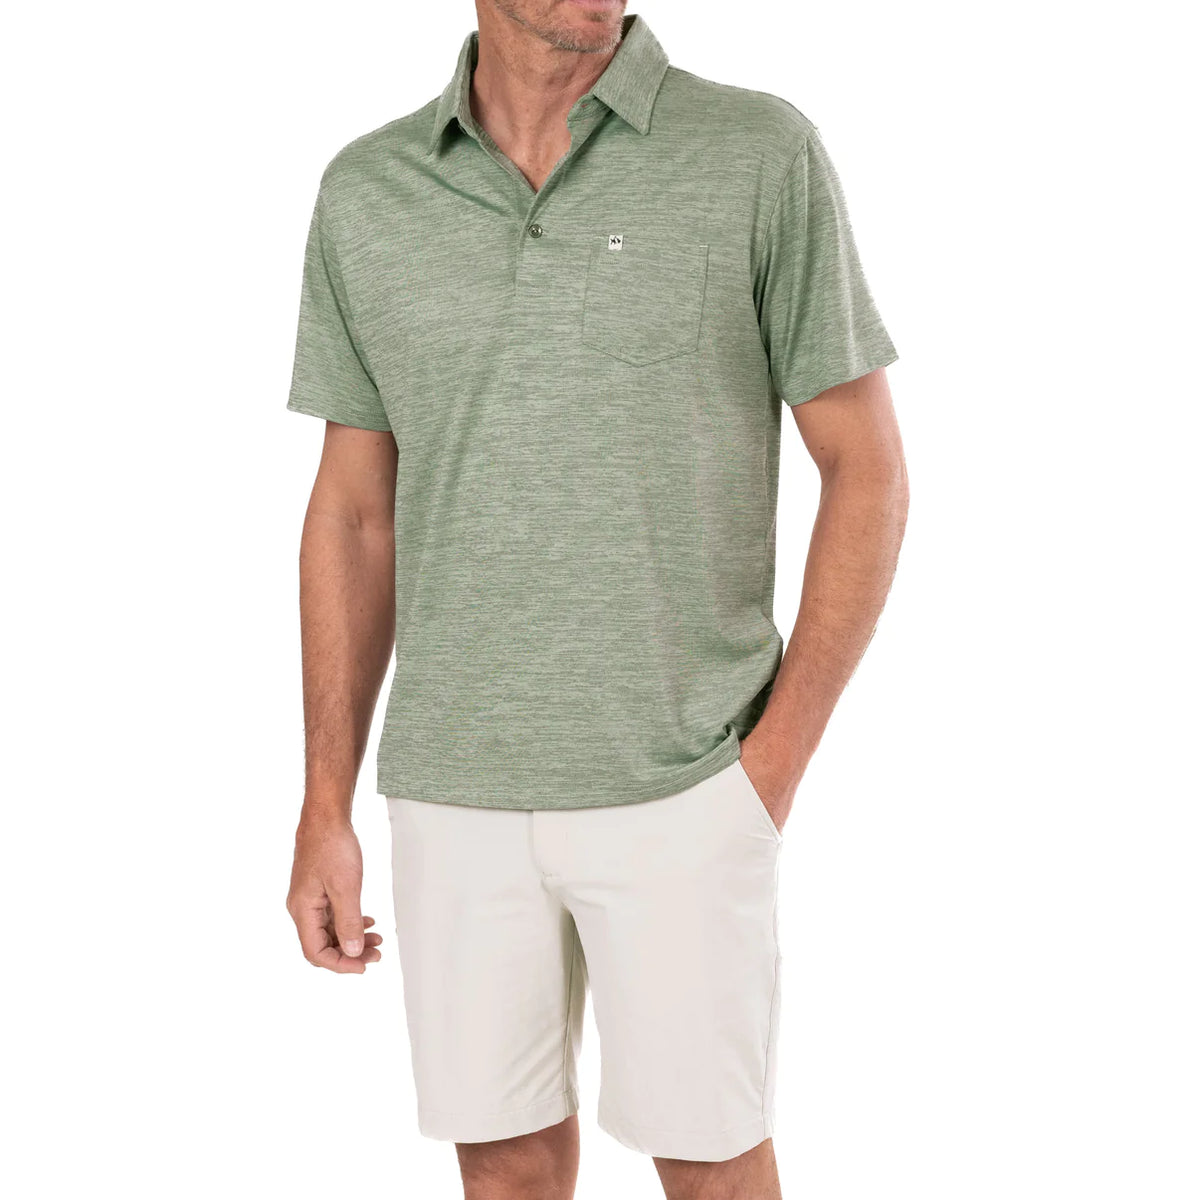 Boden Heather Performance Polo